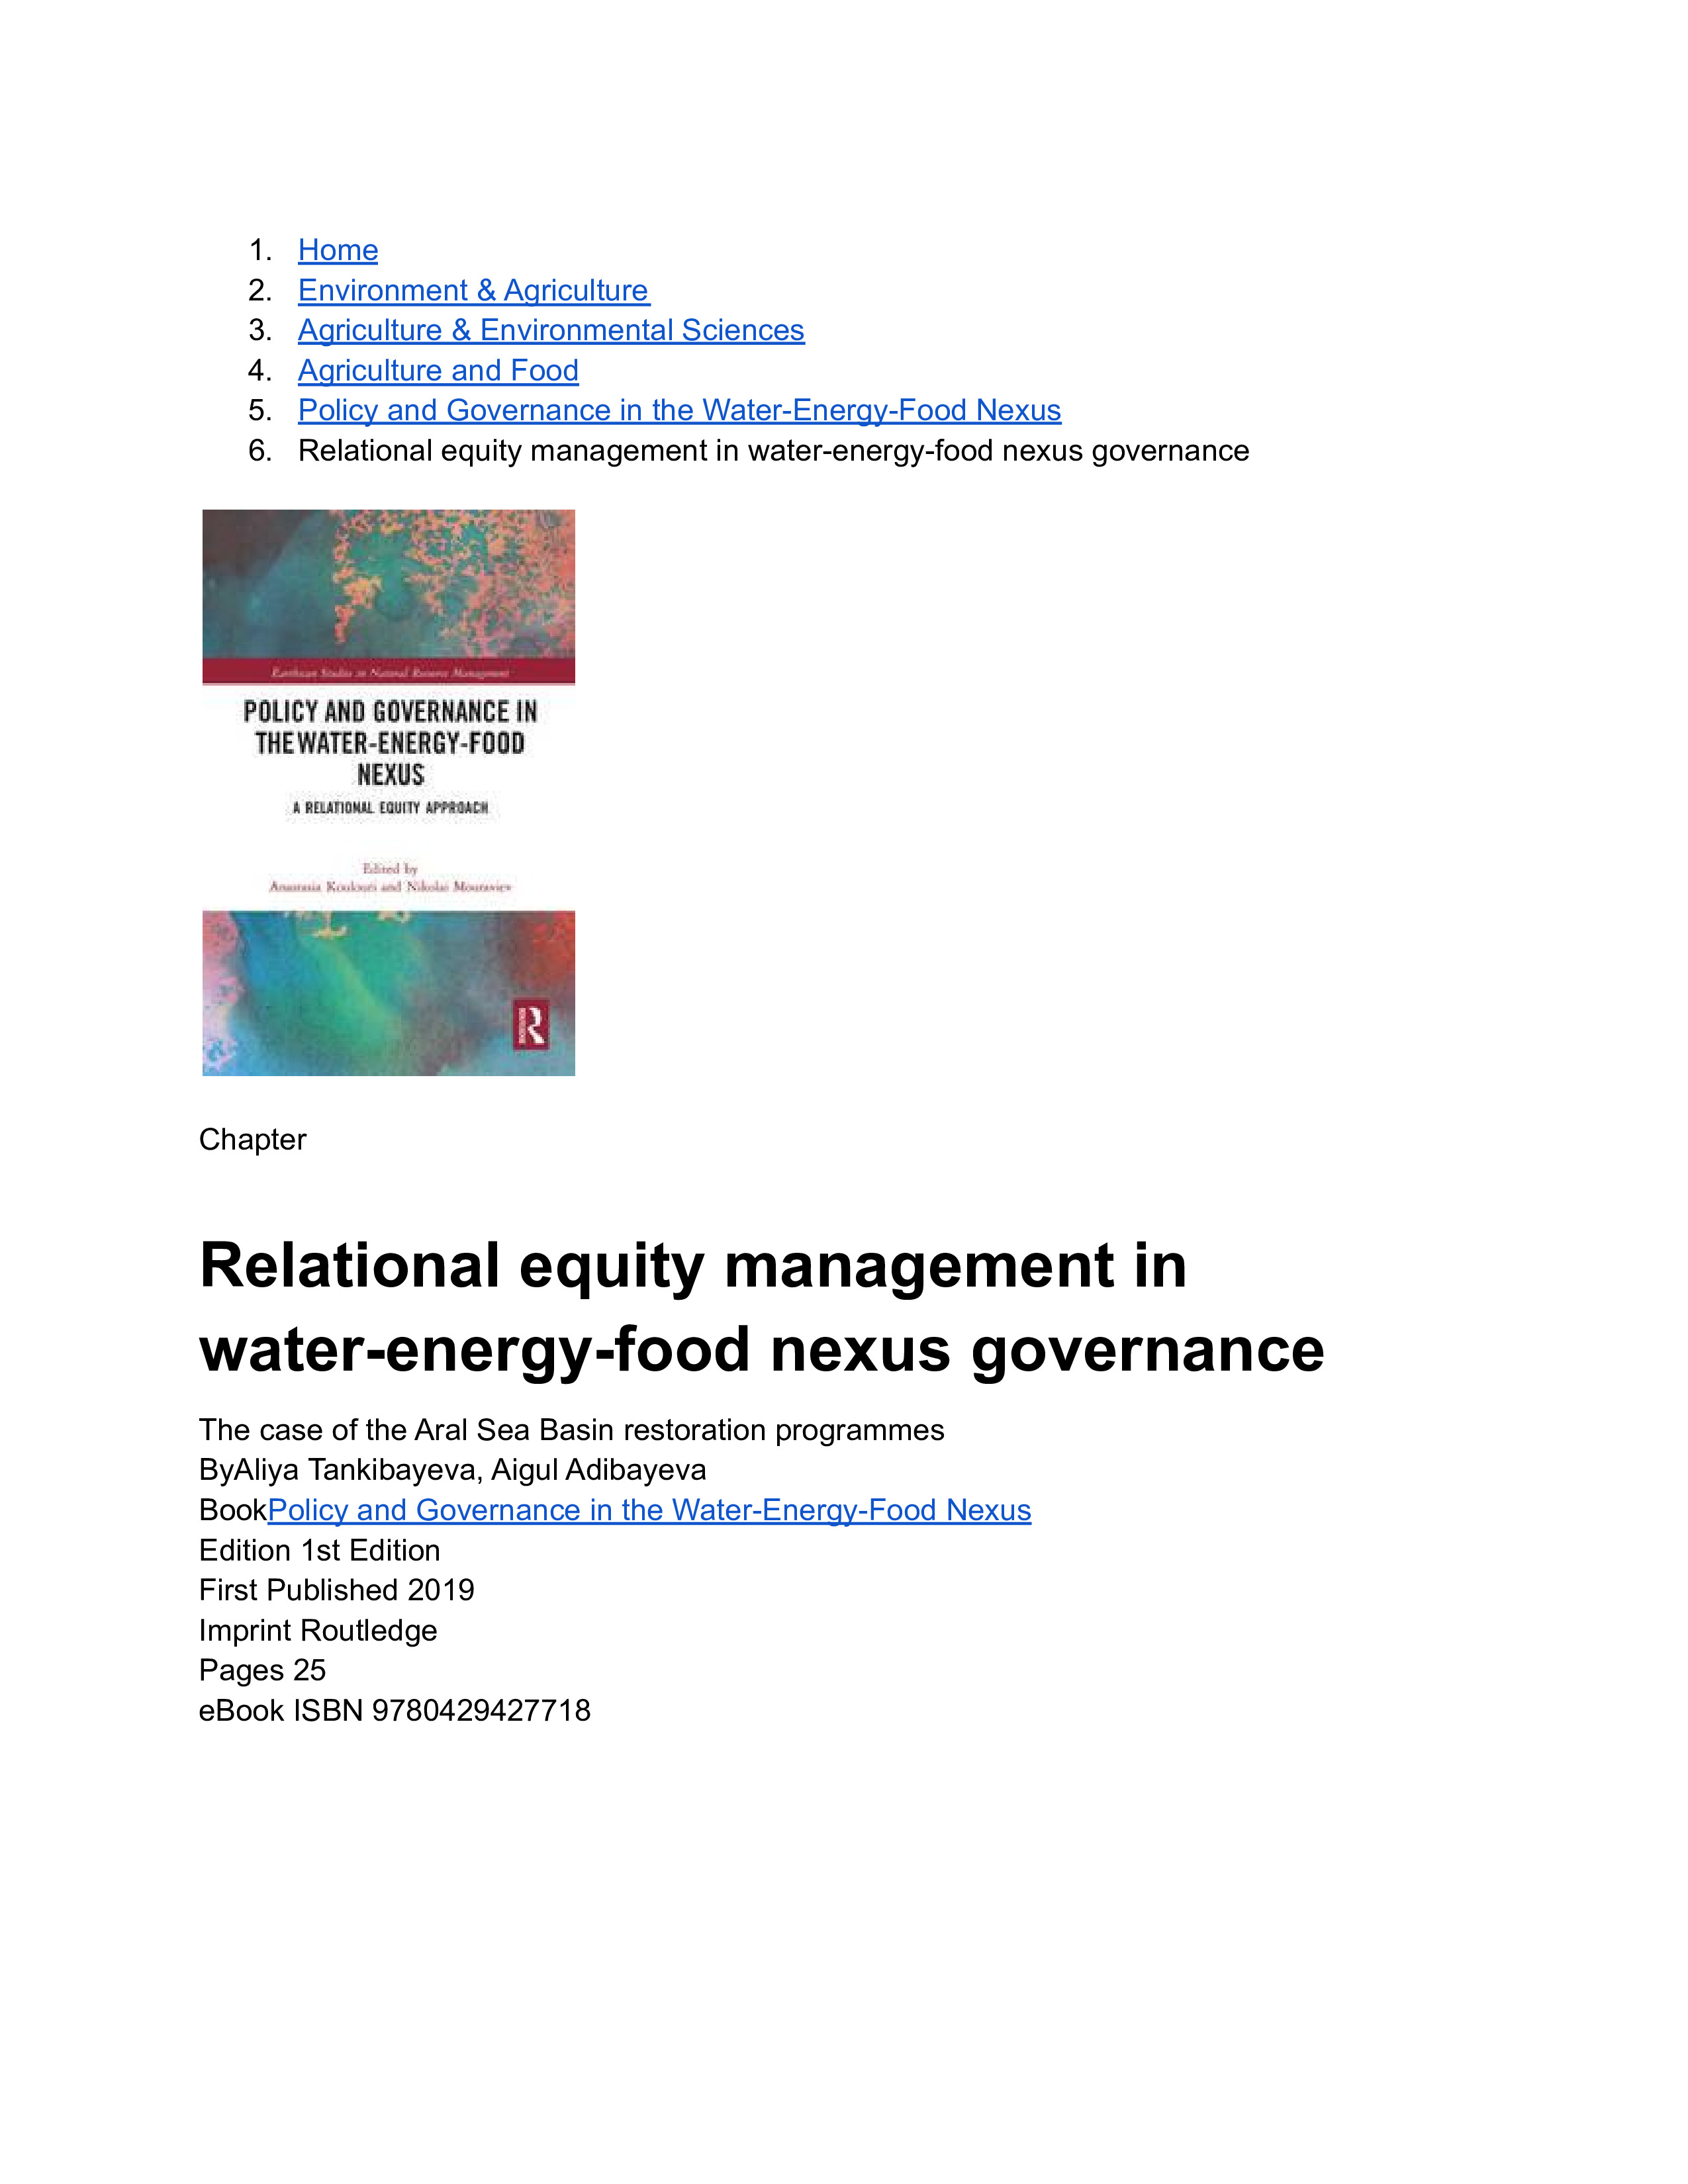  Chapter Relational equity management in water-energy-food nexus governance The case of the Aral Sea Basin restoration programmes 